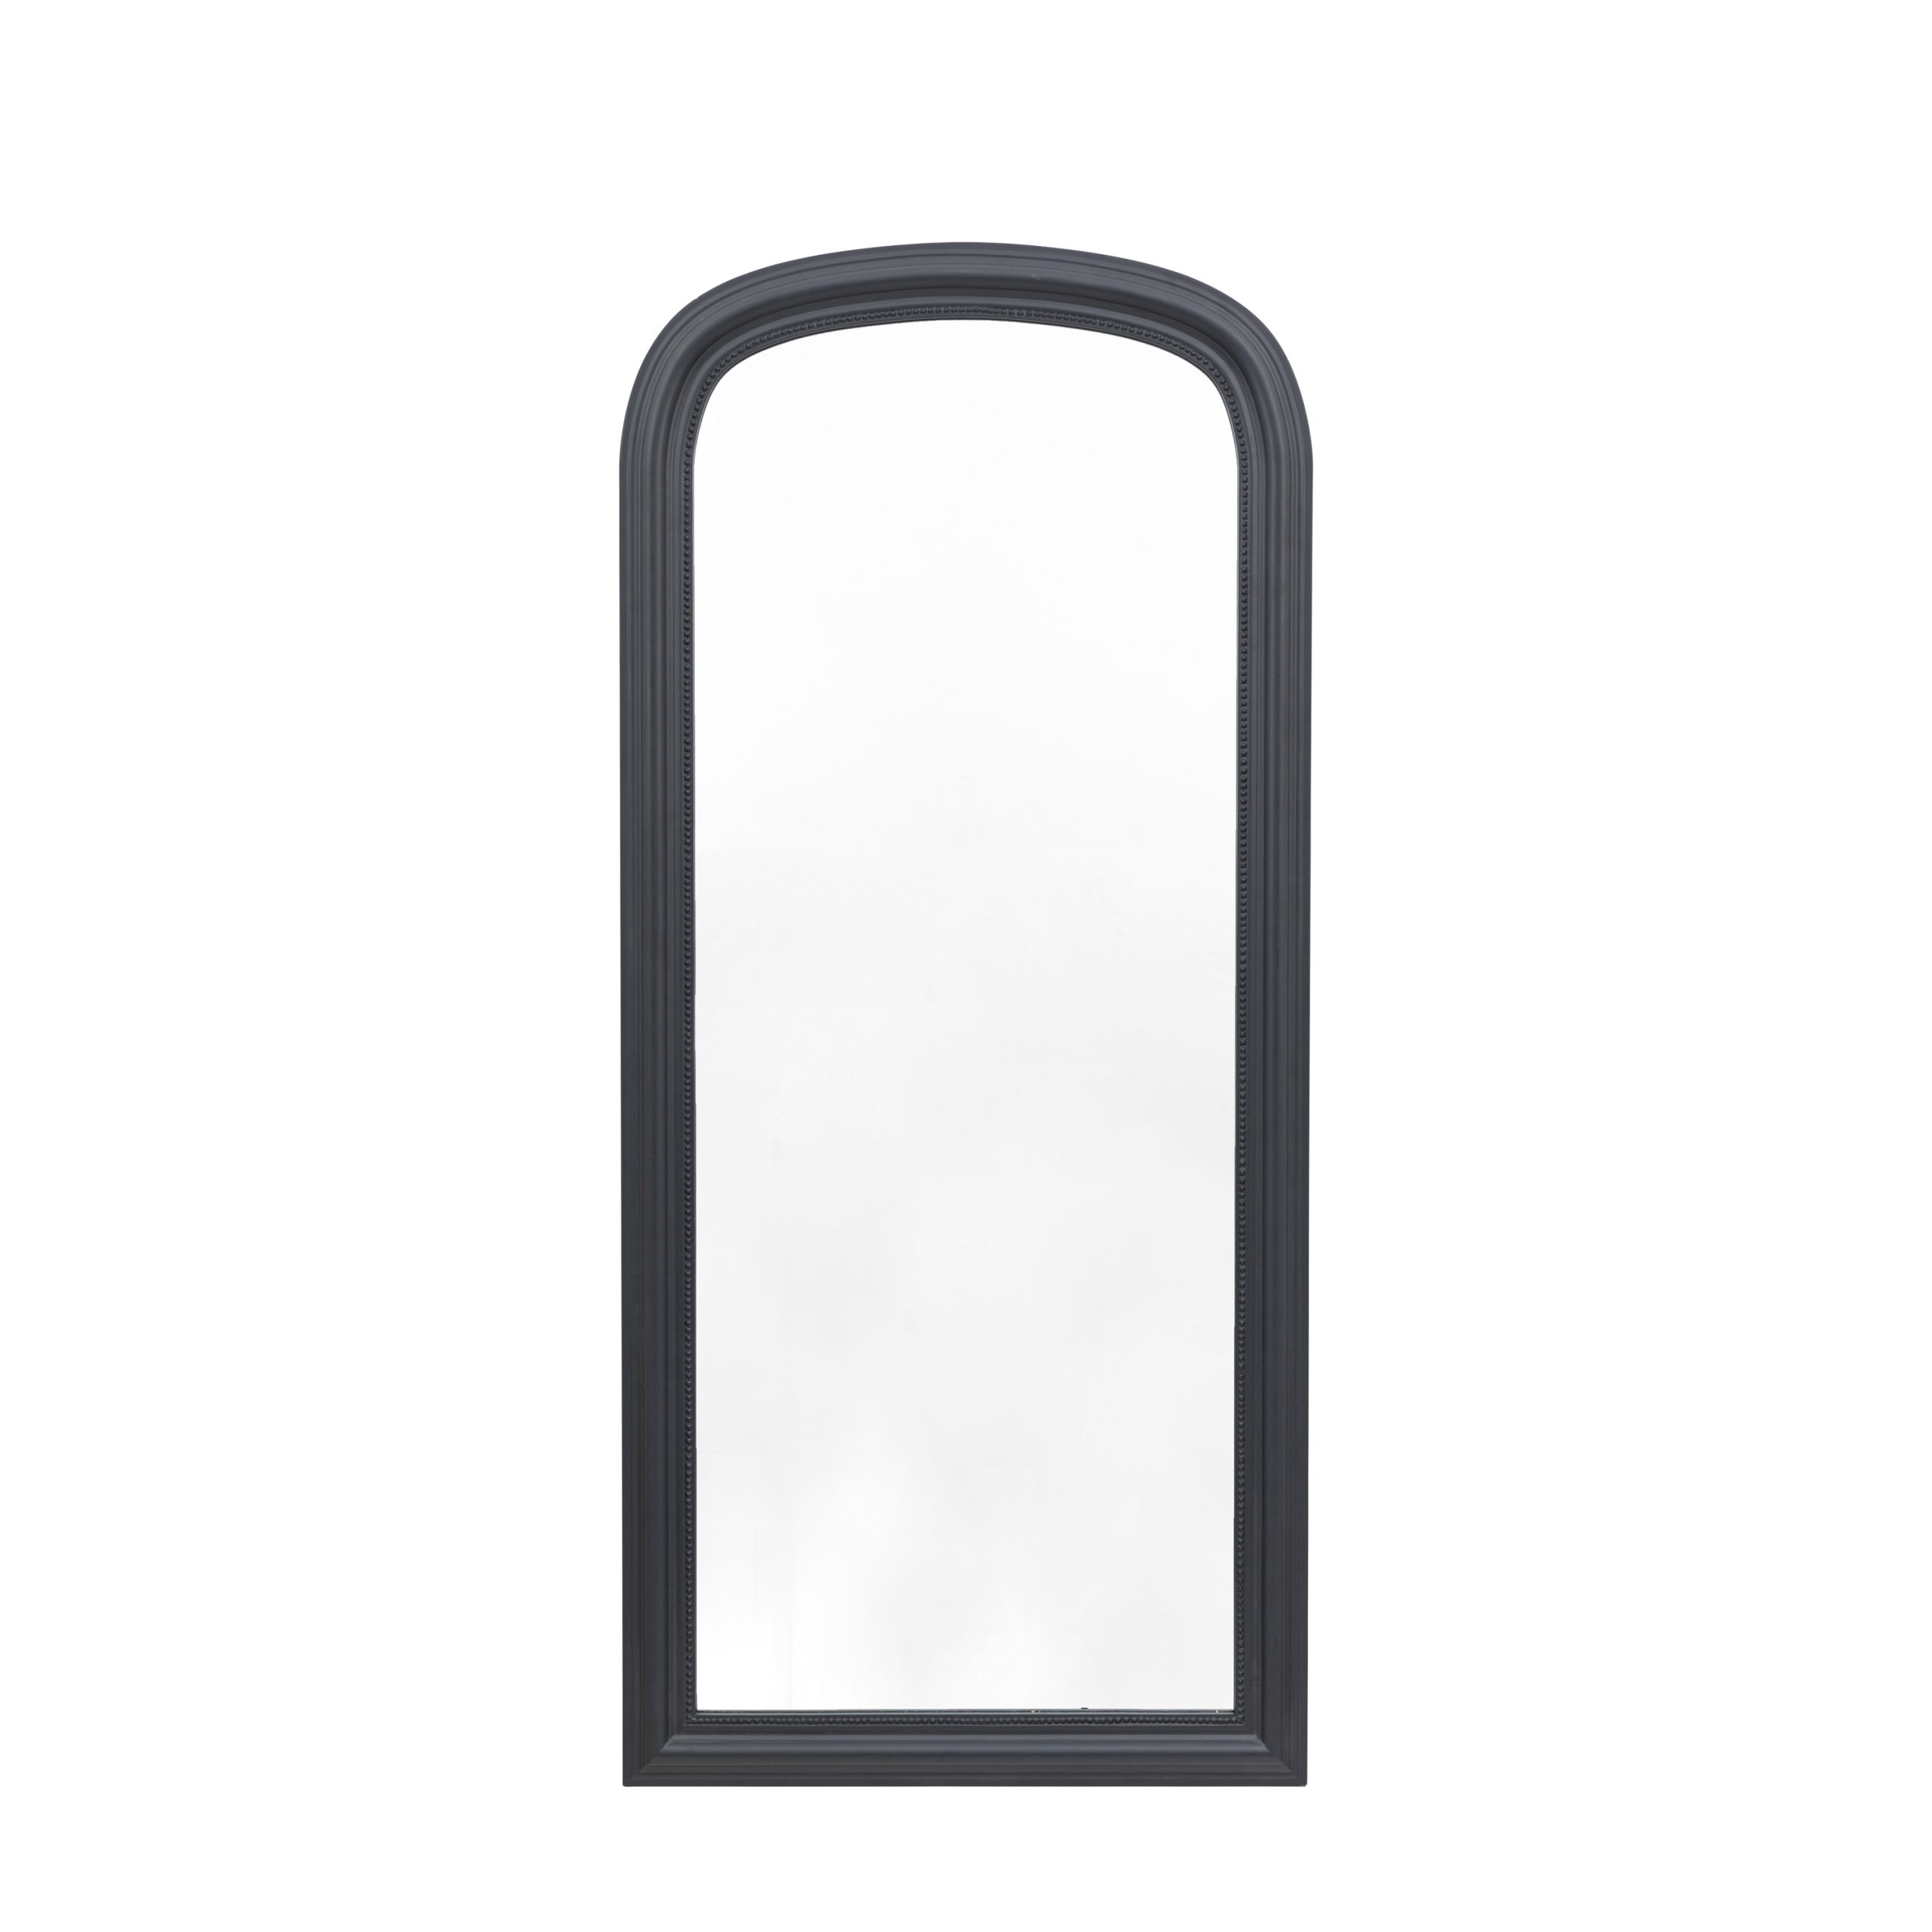 Gallery Direct Sherwood Arch Leaner Mirror Lead